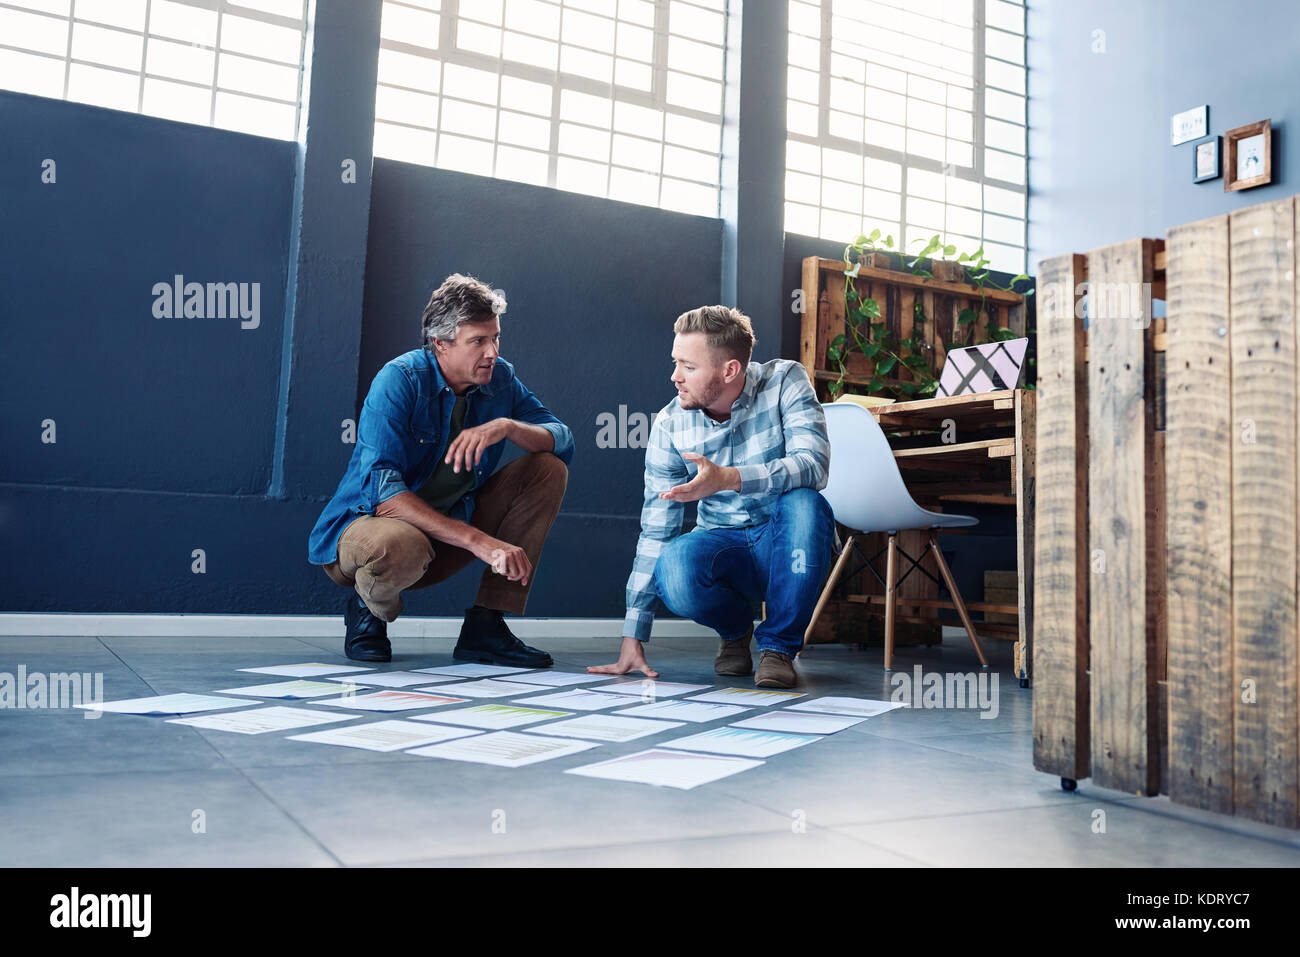 Two coworkers strategizing with papers on an office floor Stock Photo